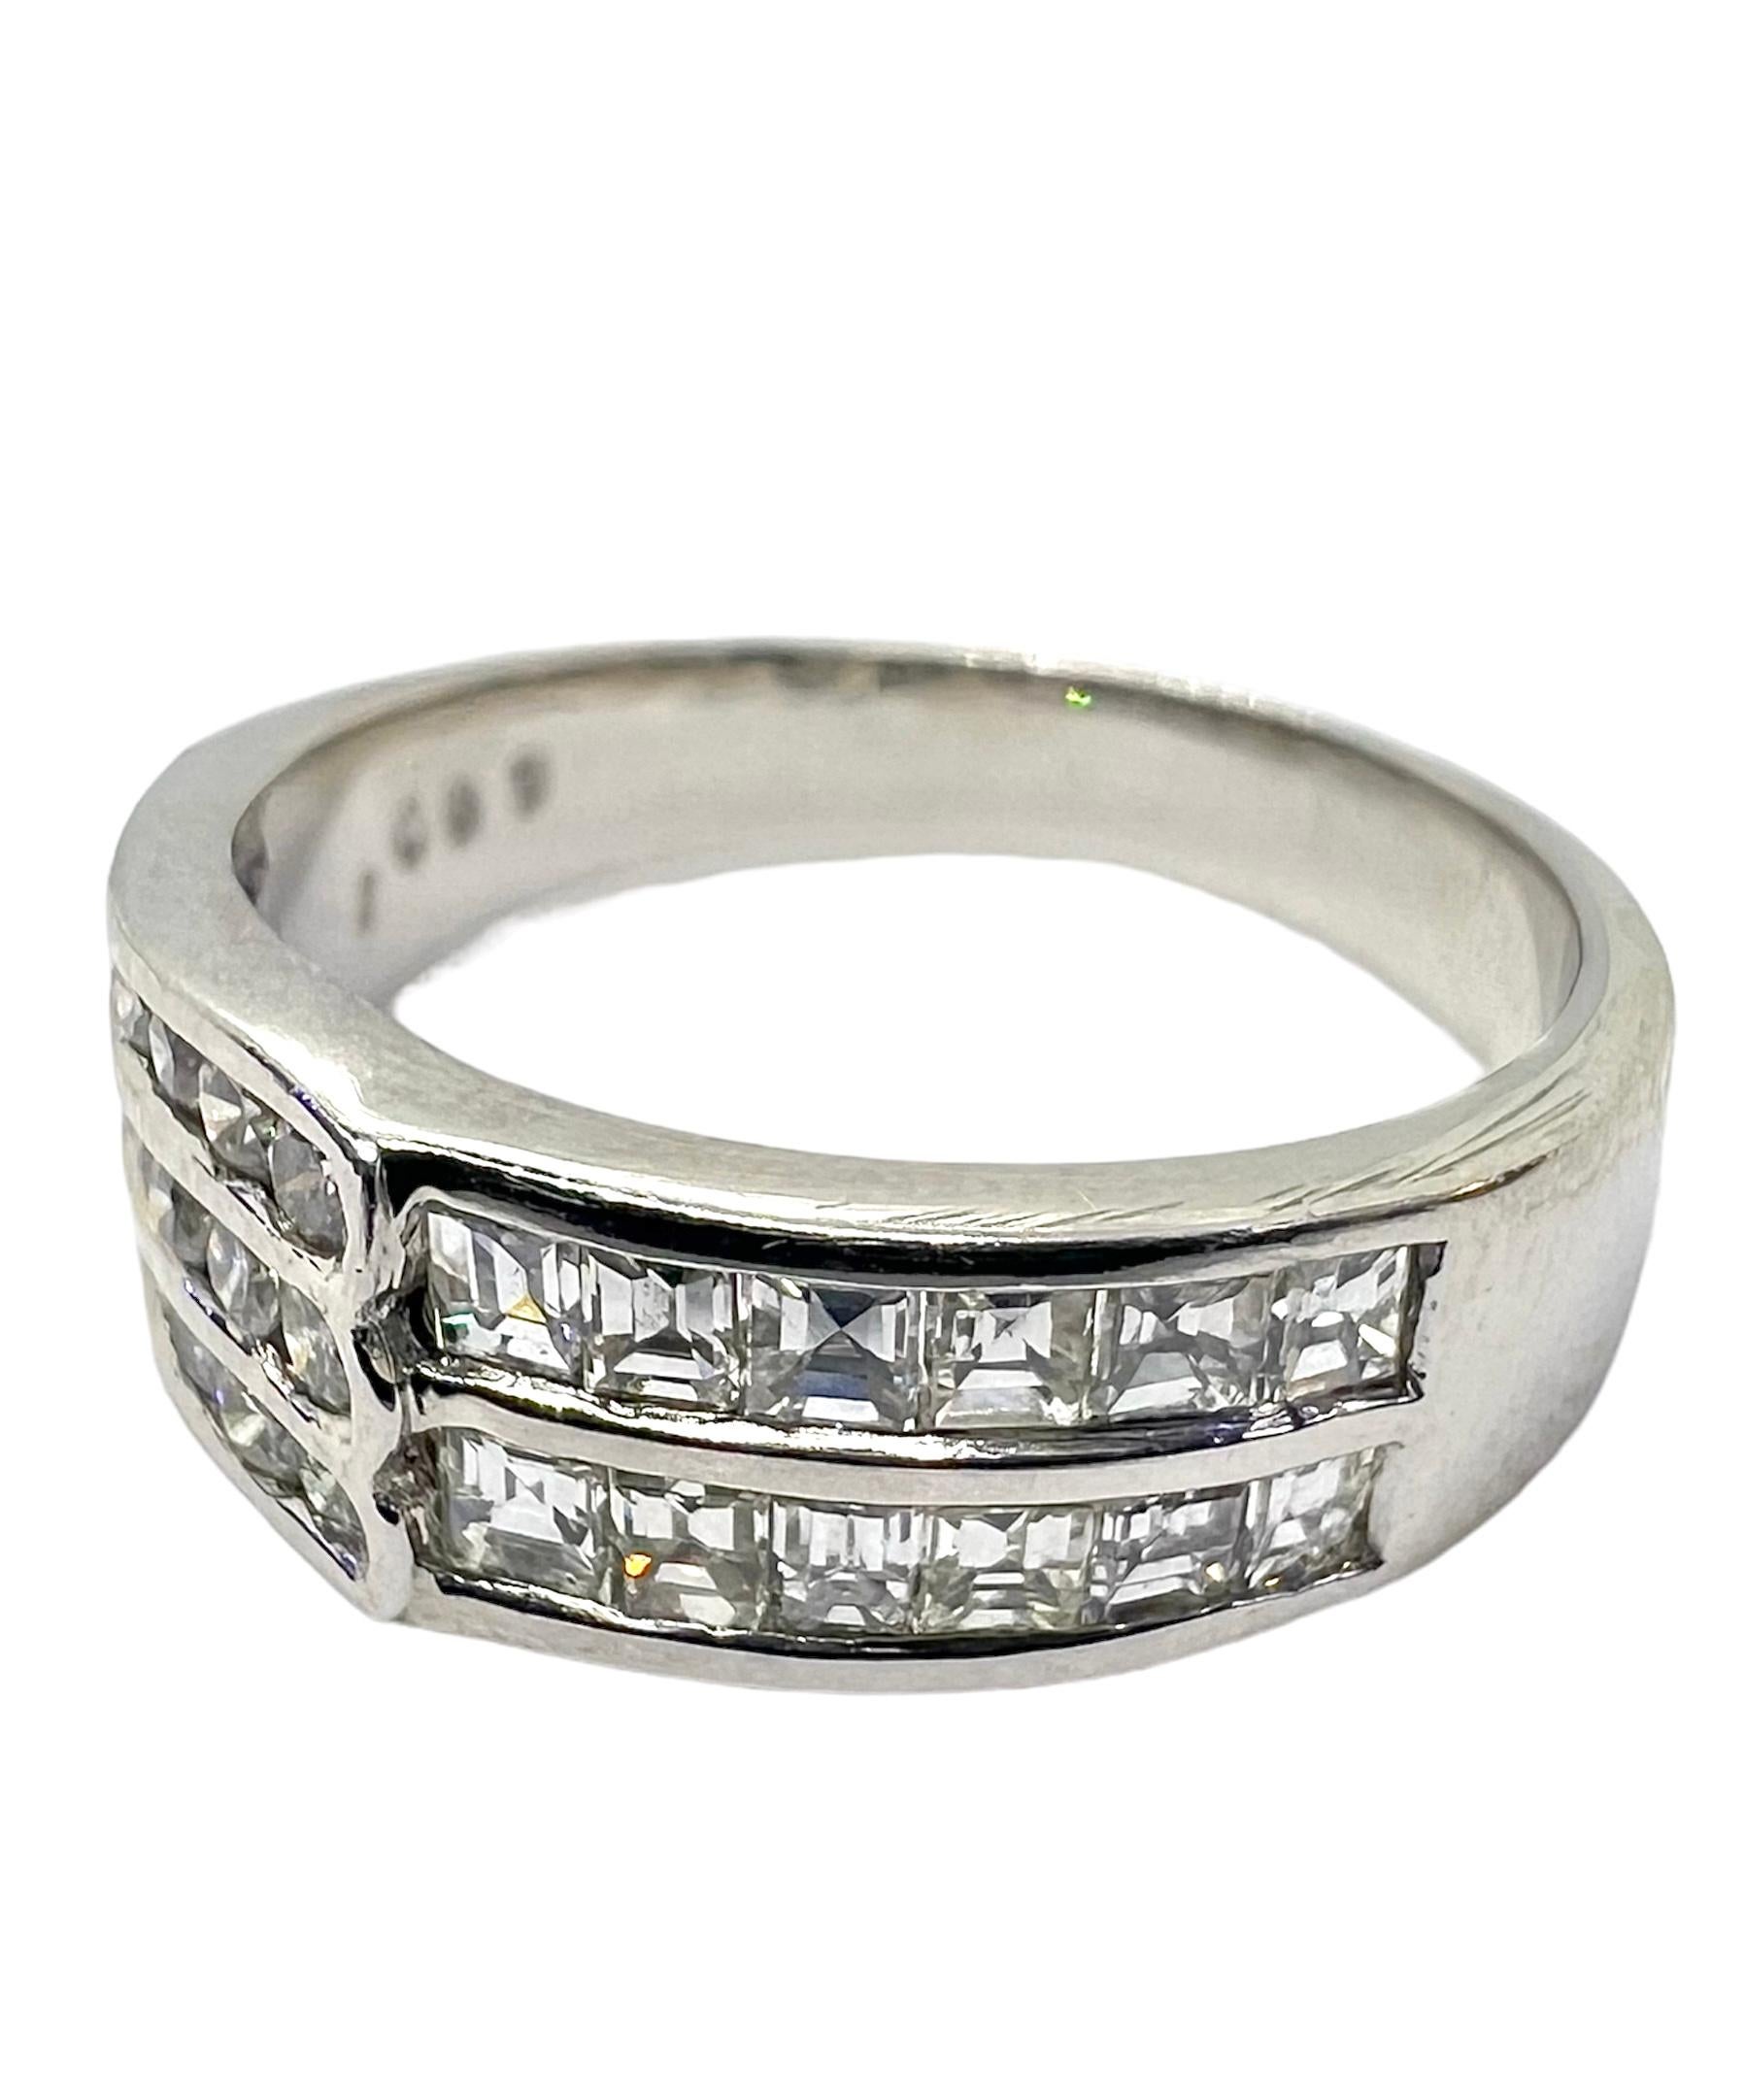 .89 carat platinum ring with square cut diamonds and small round diamonds.

Sophia D by Joseph Dardashti LTD has been known worldwide for 35 years and are inspired by classic Art Deco design that merges with modern manufacturing techniques.